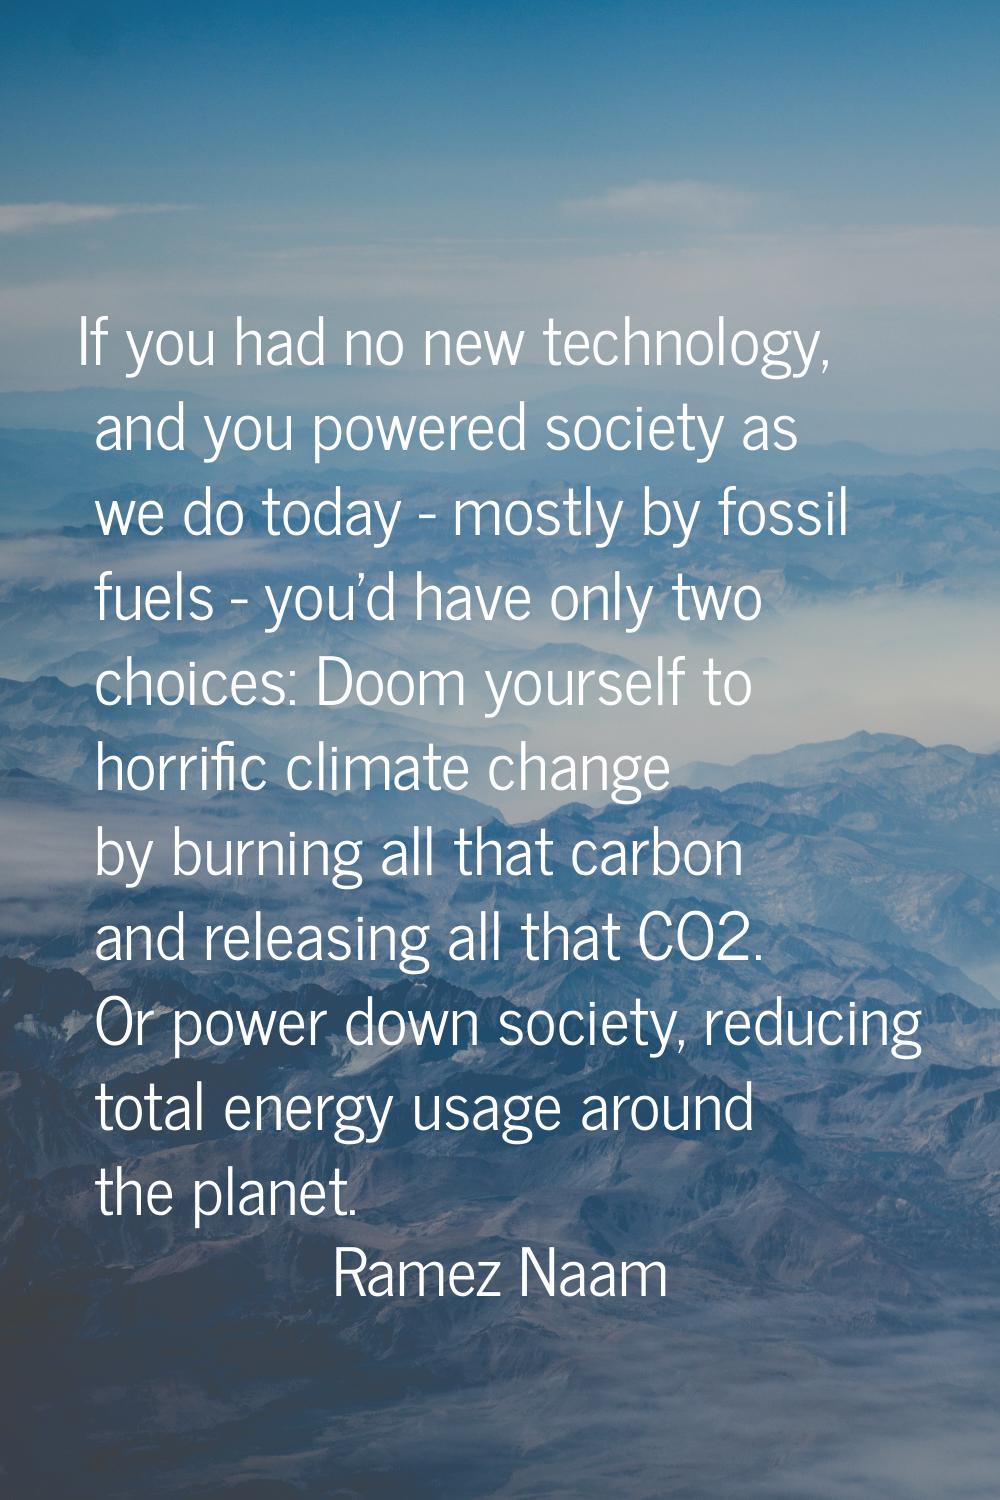 If you had no new technology, and you powered society as we do today - mostly by fossil fuels - you